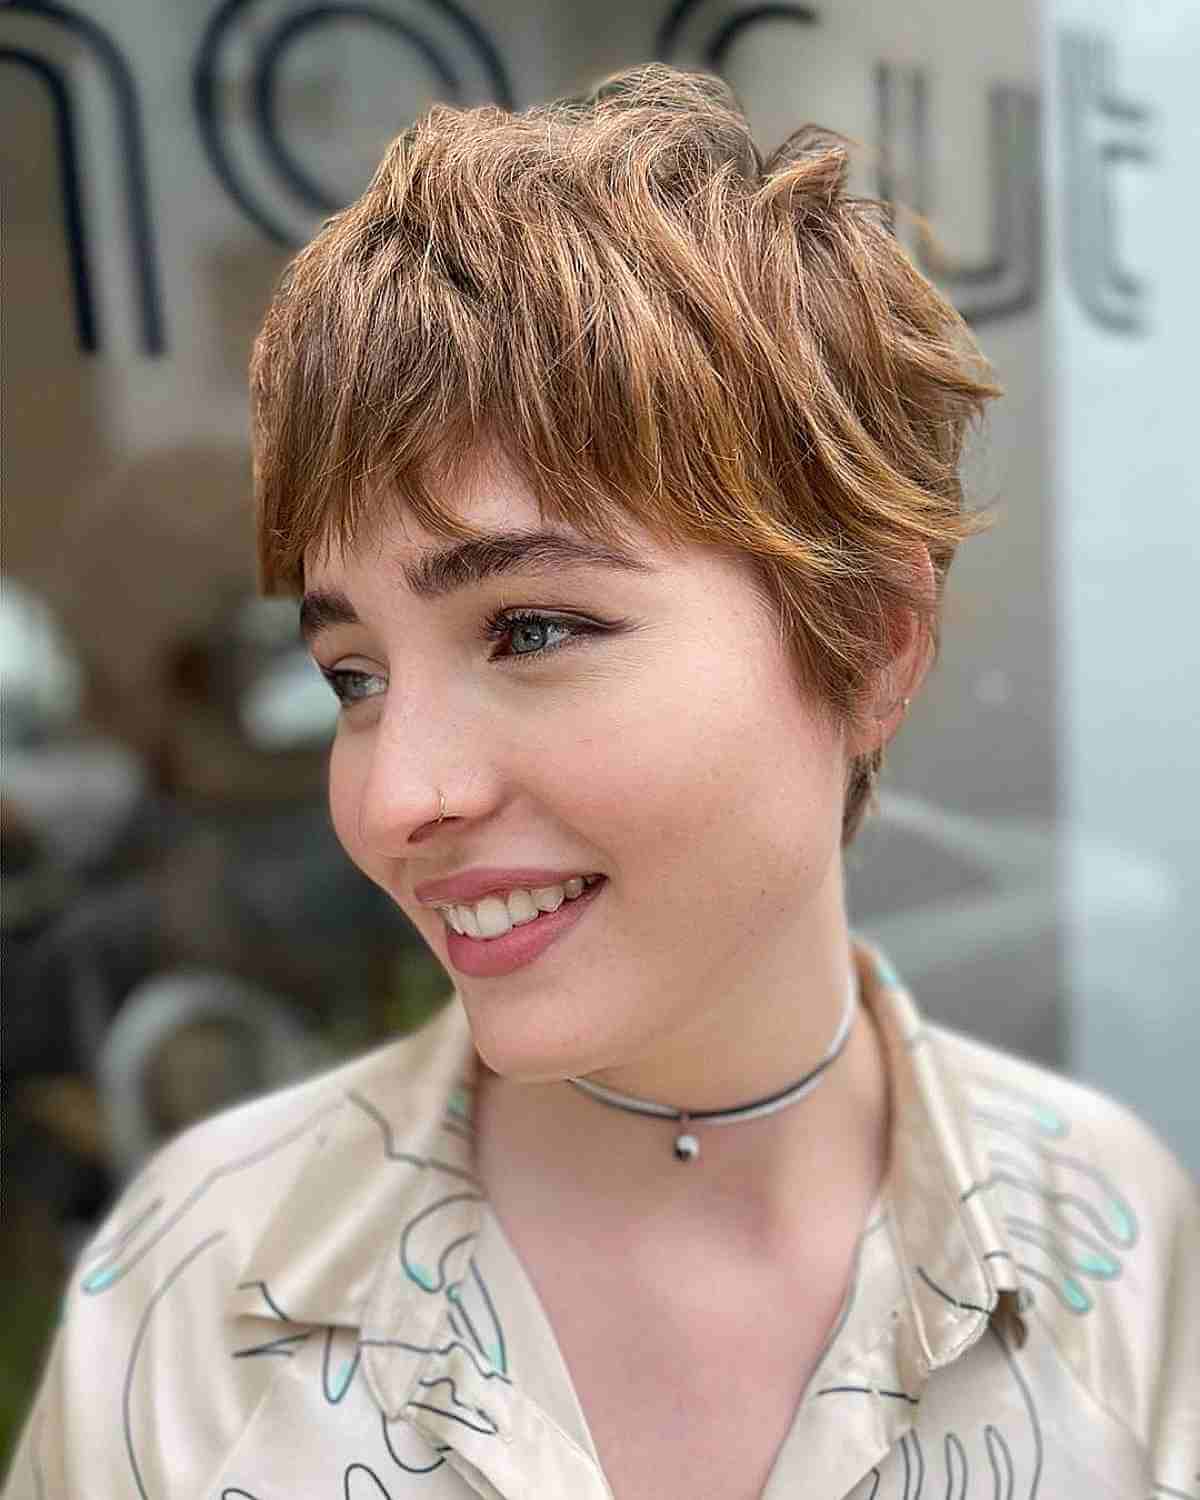 The Cutest Pixie Cut with Messy Top